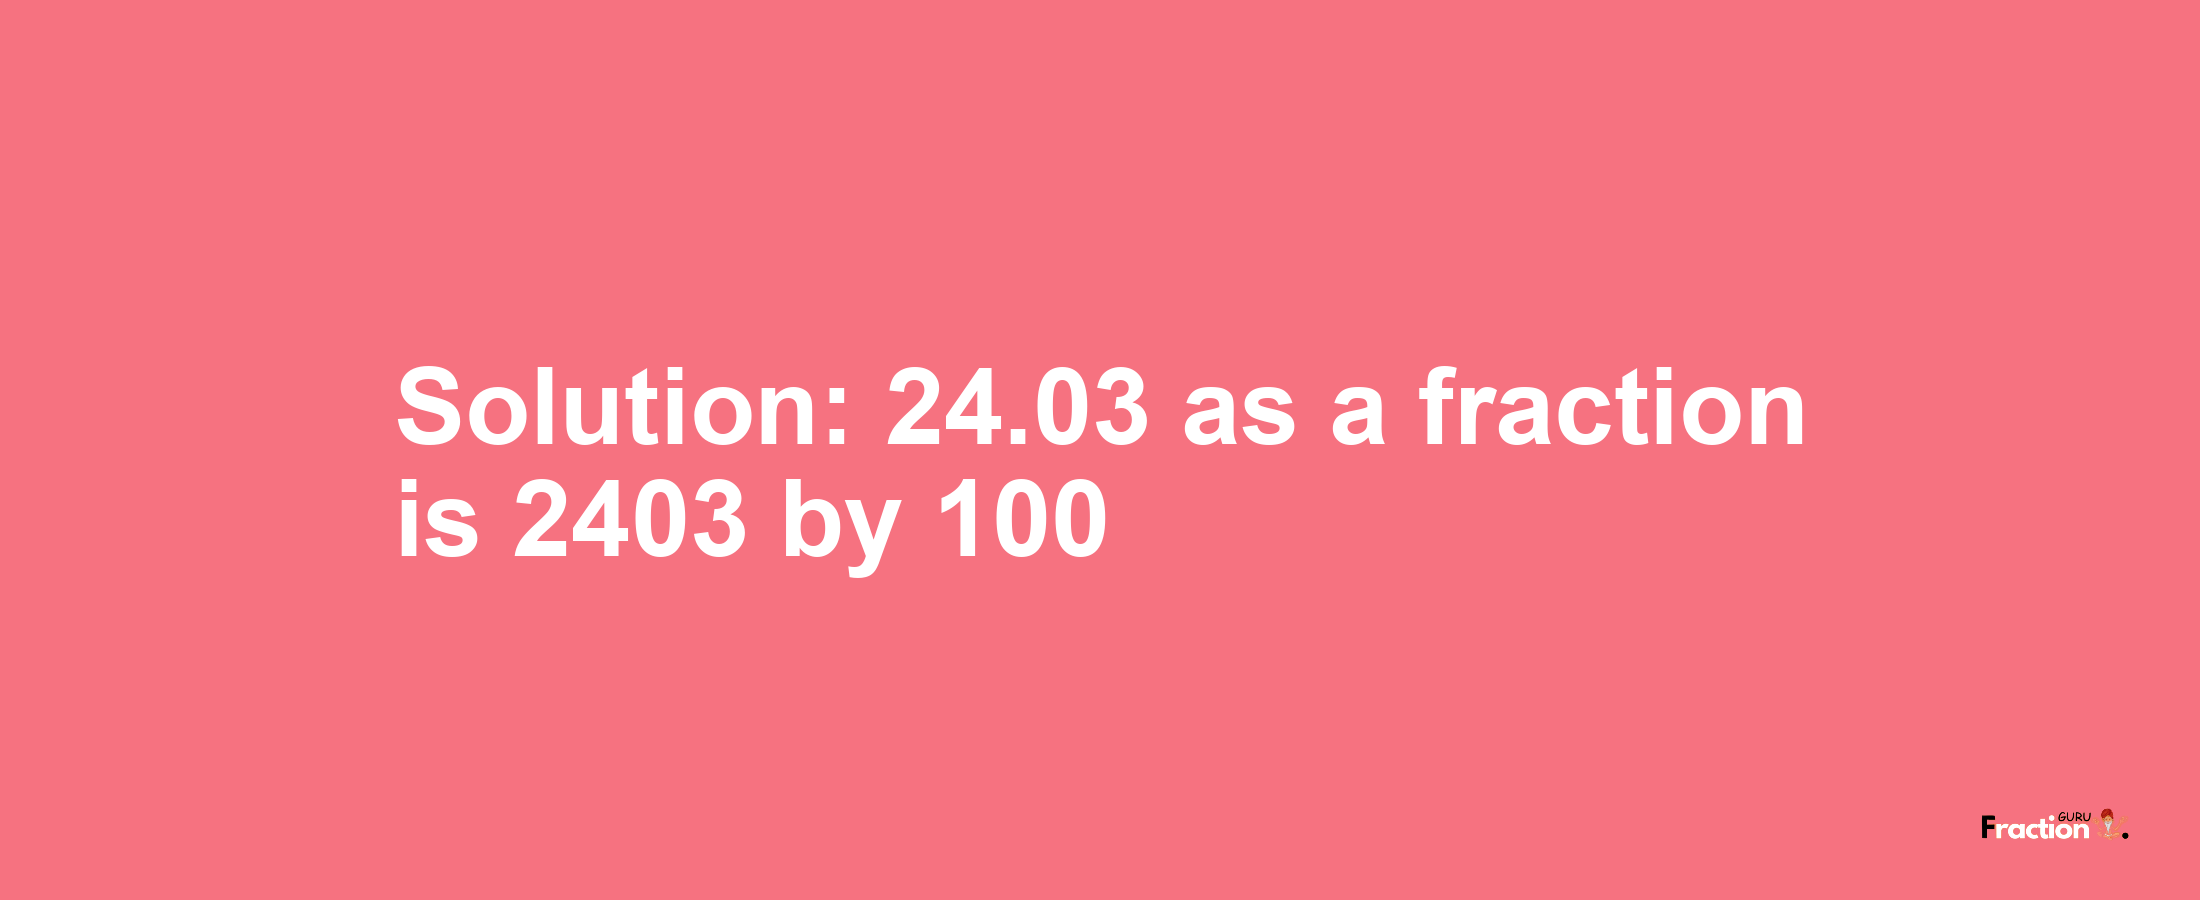 Solution:24.03 as a fraction is 2403/100